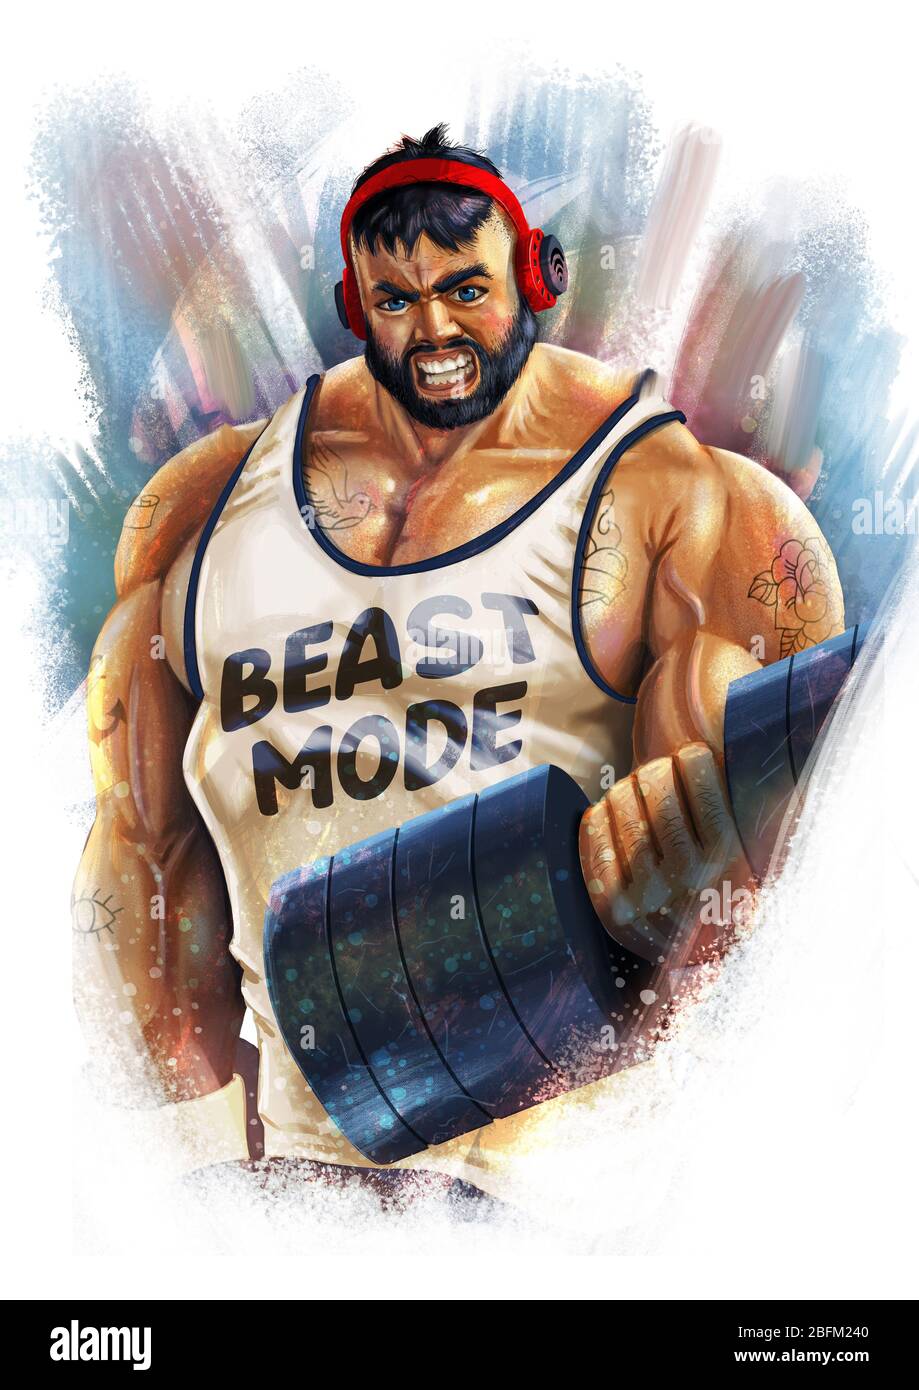 Digital illustration of muscular man with tattoo’s and headphones and beast mode written on his vest lifting weights Stock Photo